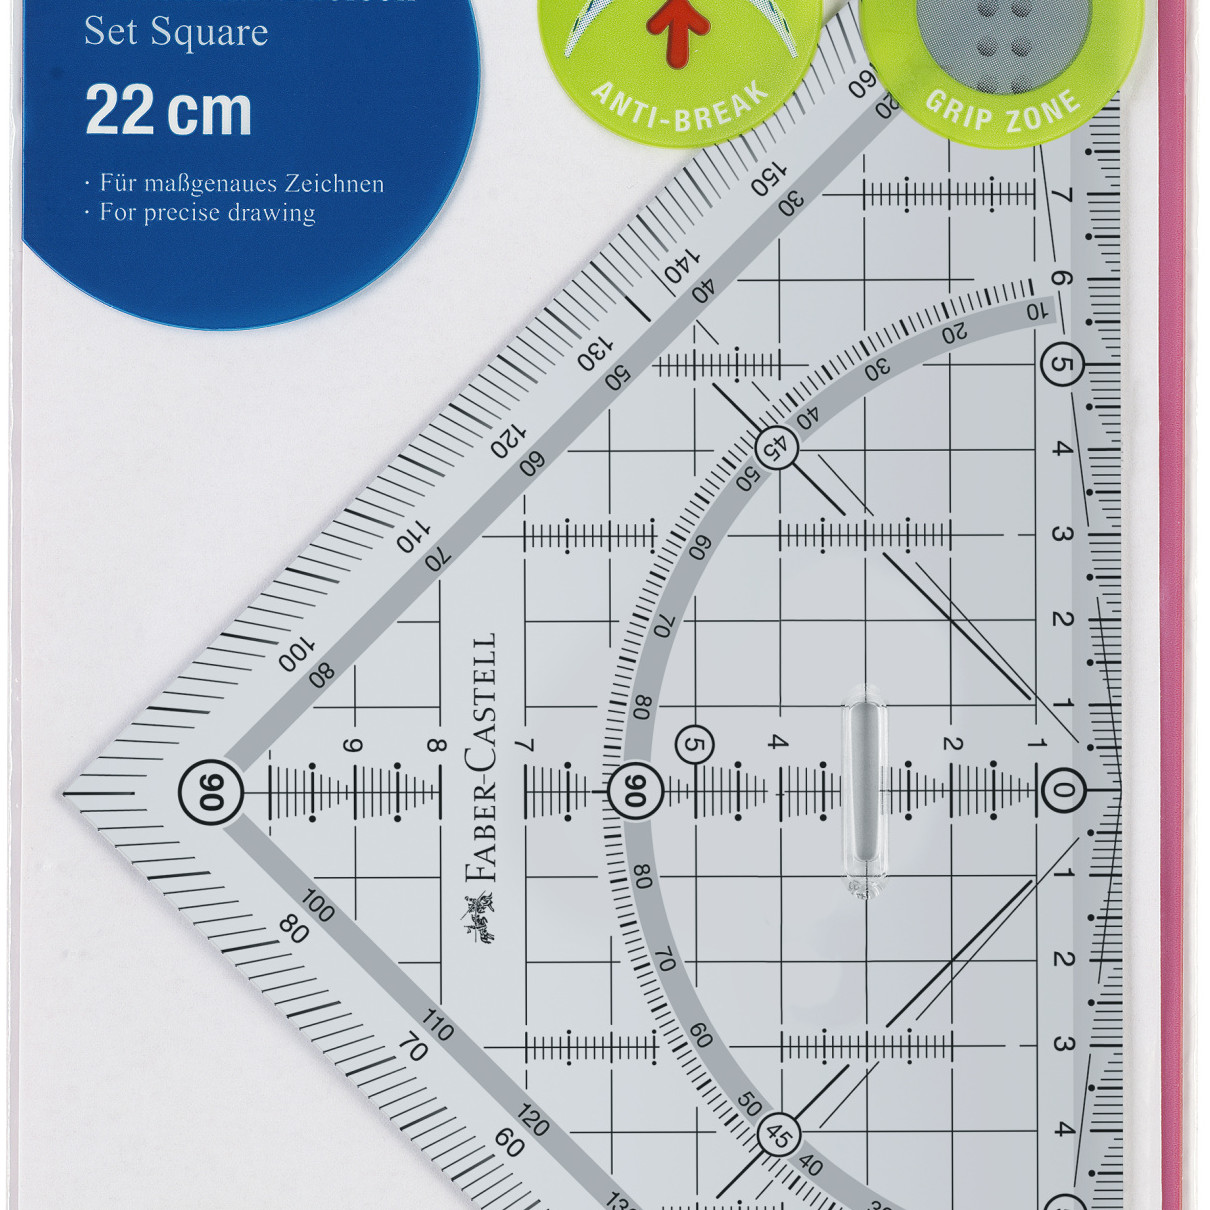 Faber-Castell Grip Triangle - 22cm